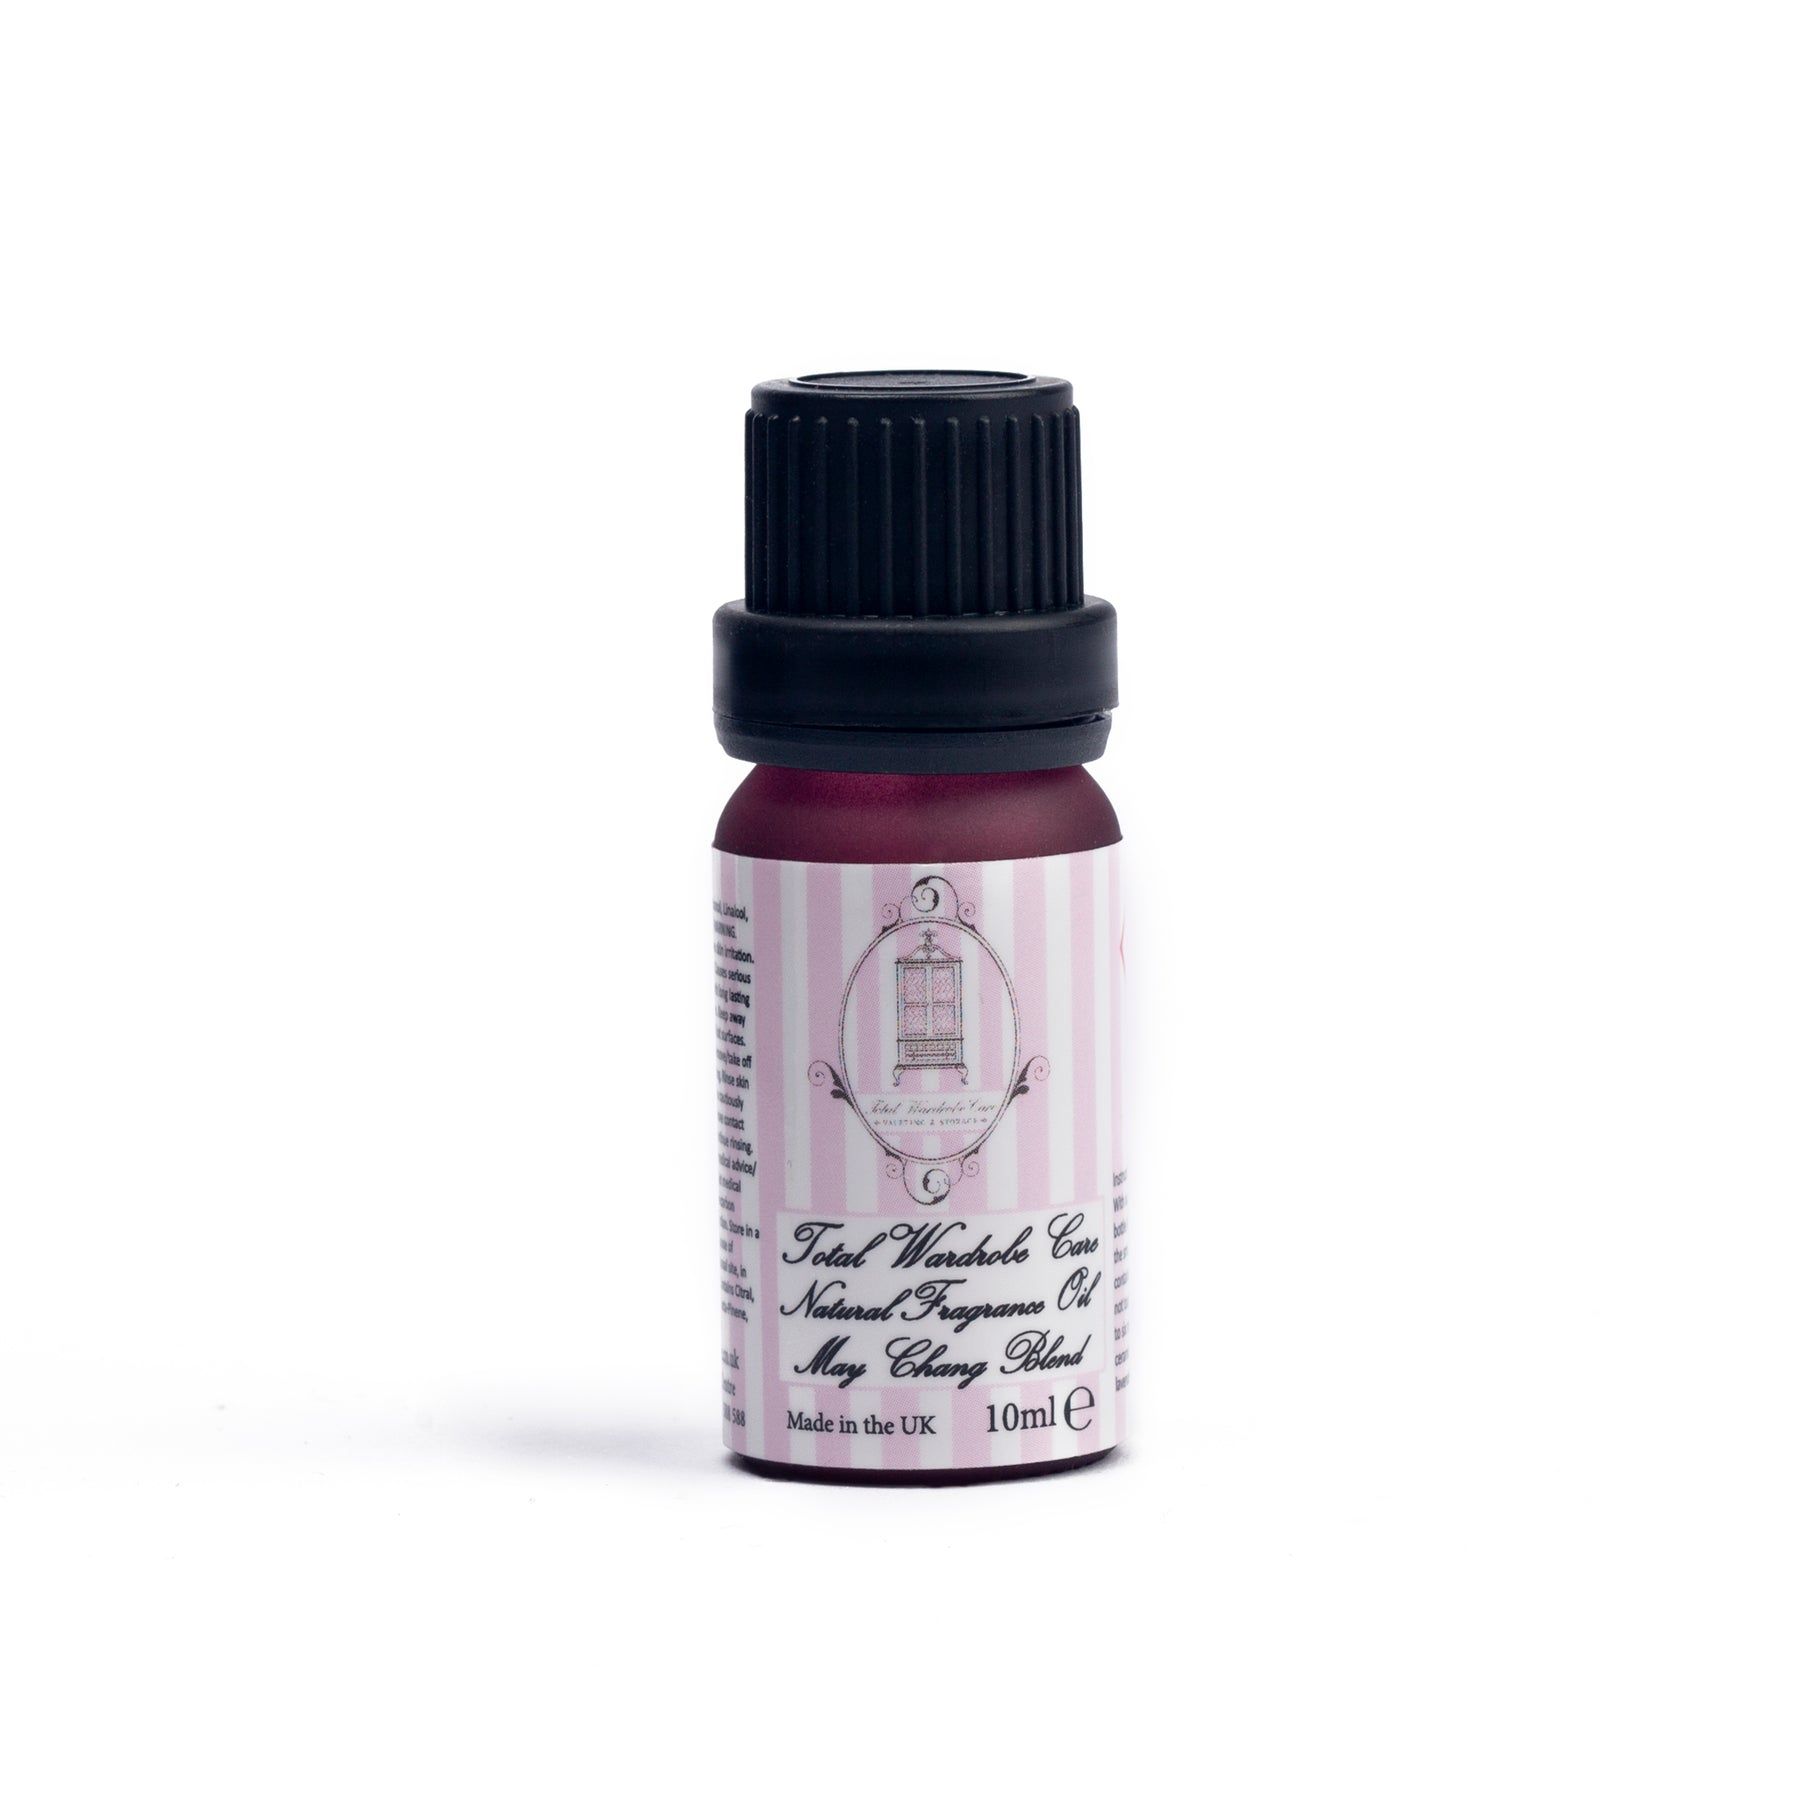 may chang blend essential oil on white background